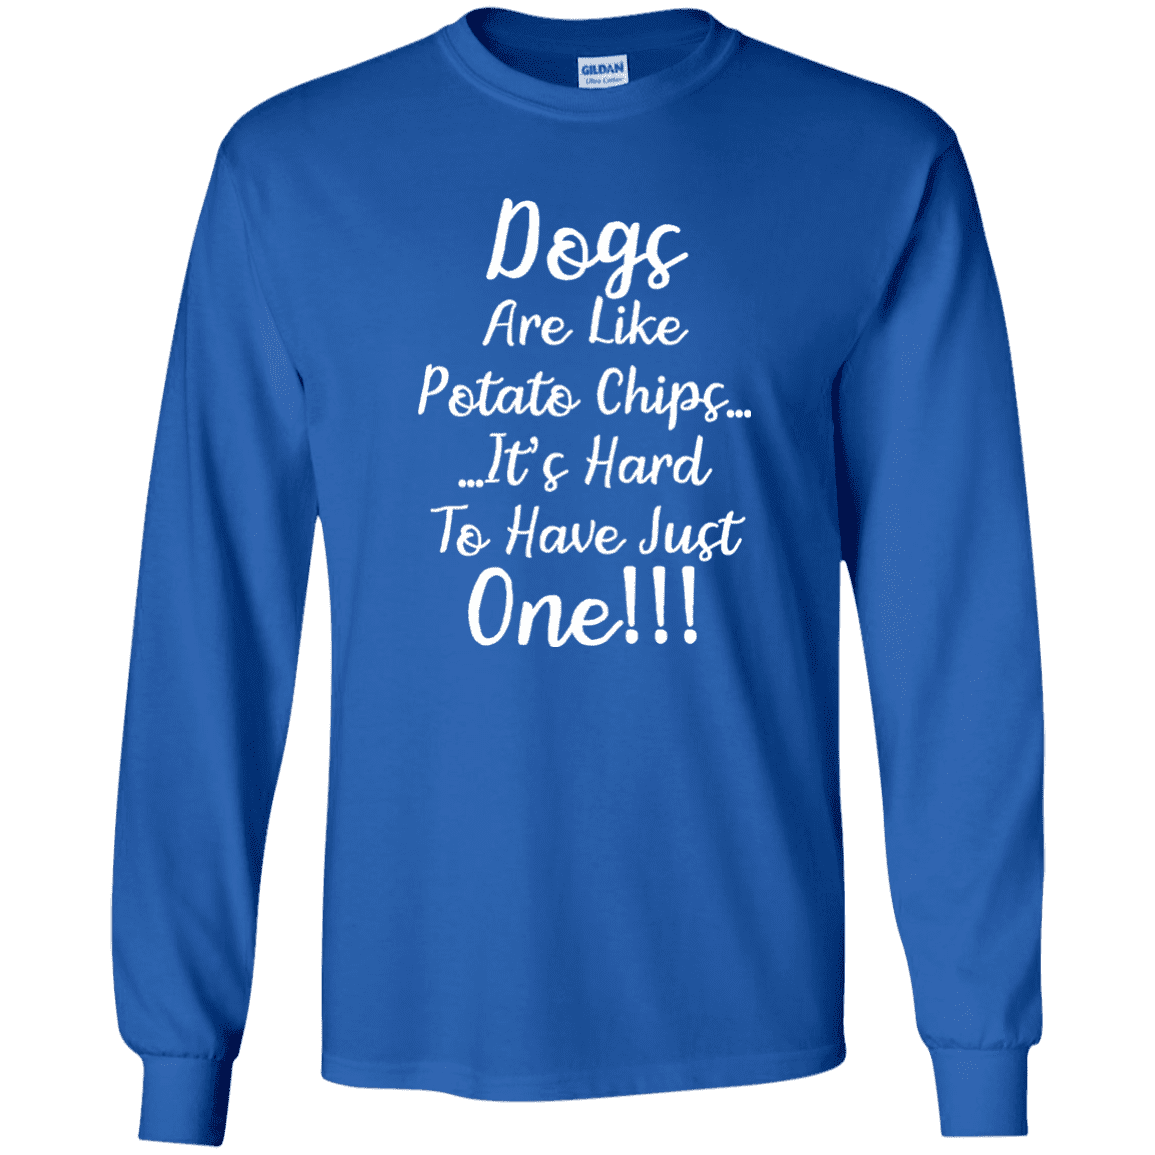 Dogs Are Like Potato Chips - Long Sleeve T Shirt.